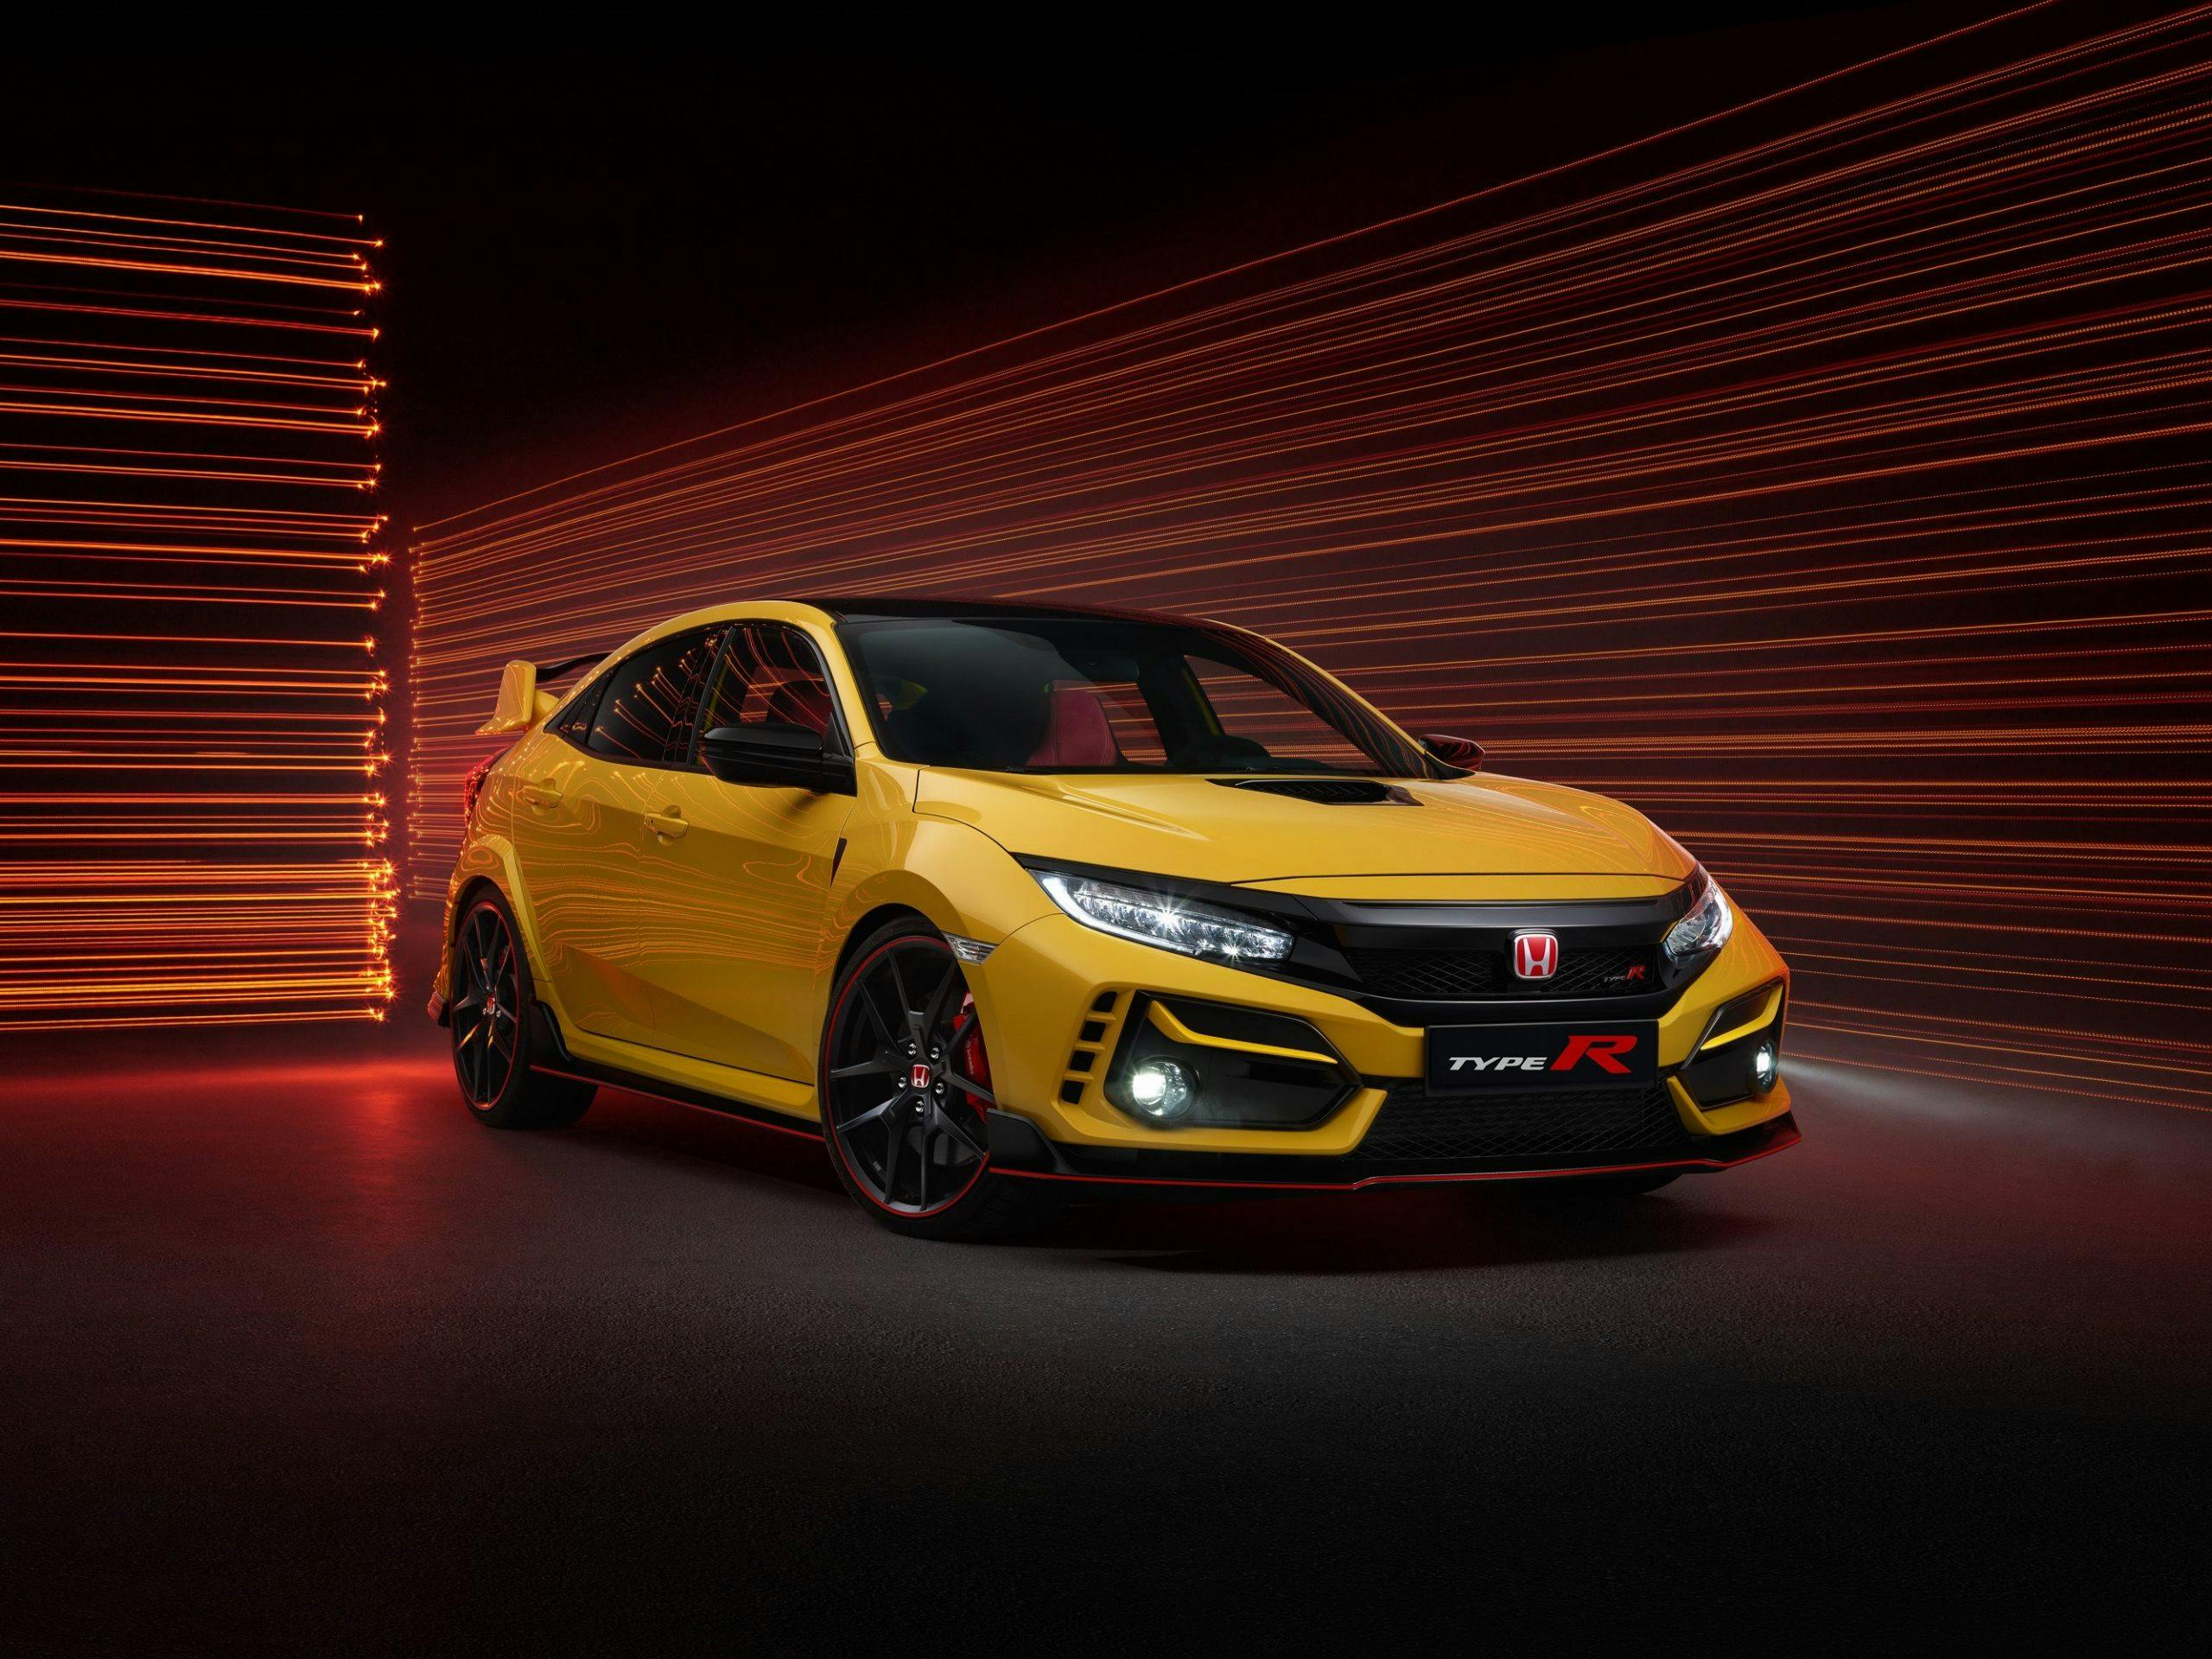 Honda sells all 100 Canadabound Civic Type R Limited Editions in 4